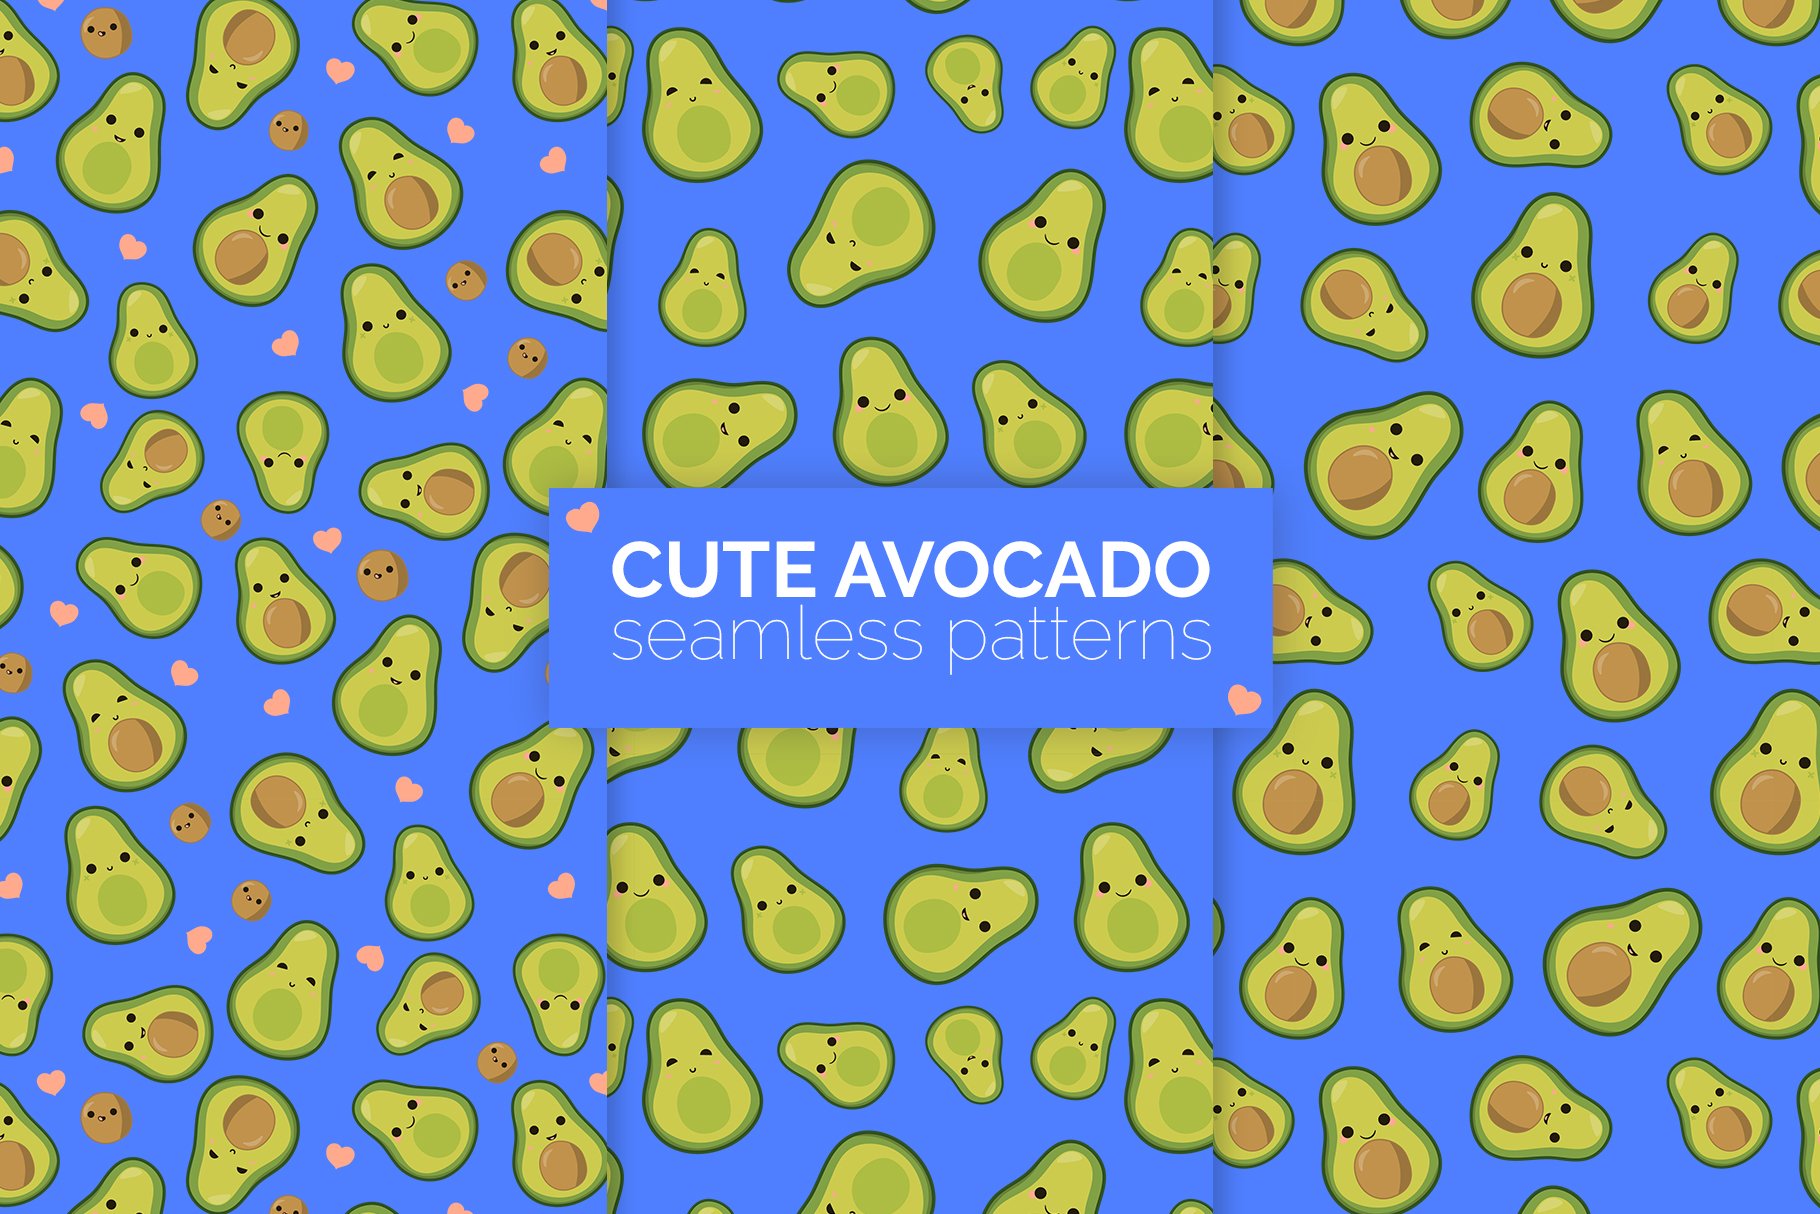 Cute Avocado Seamless Patterns cover image.